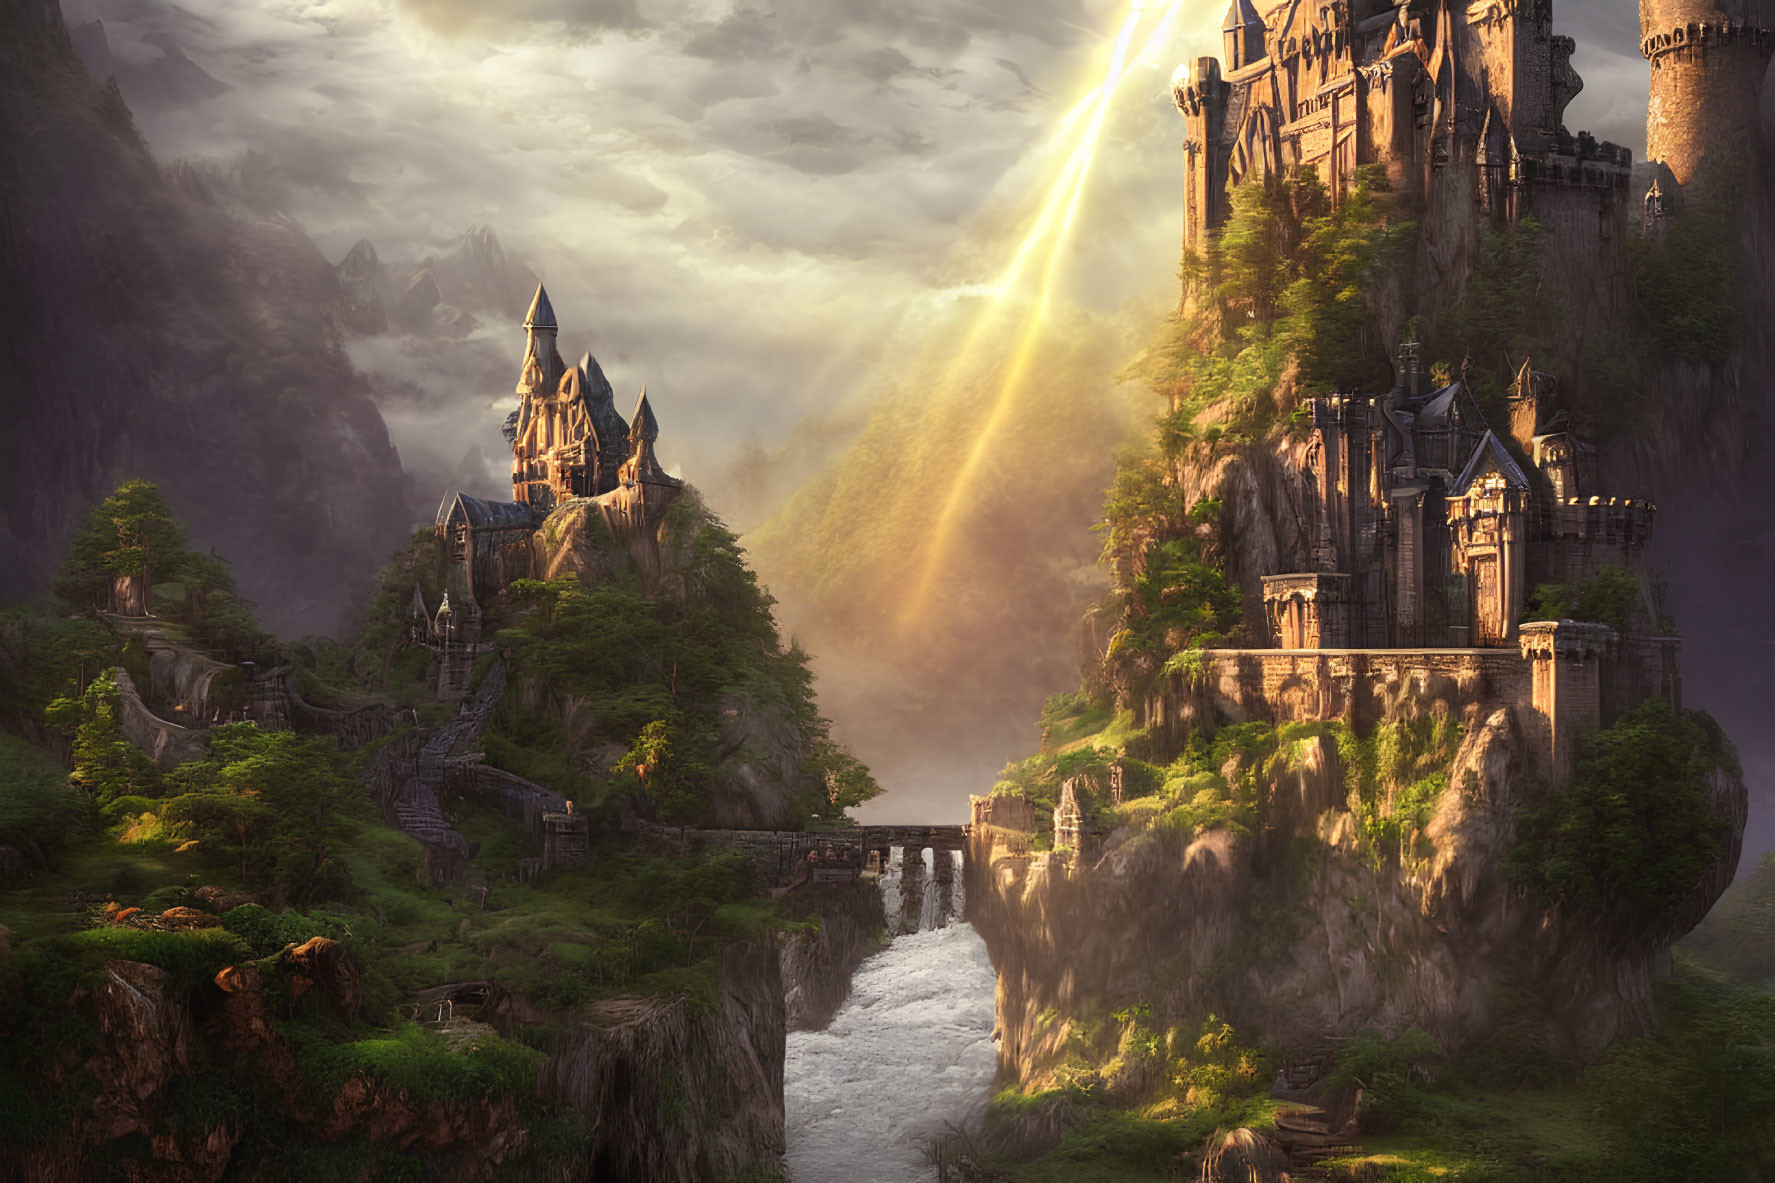 Majestic fantasy castle on rugged cliffs with waterfall and river, illuminated by dramatic sunbeam.